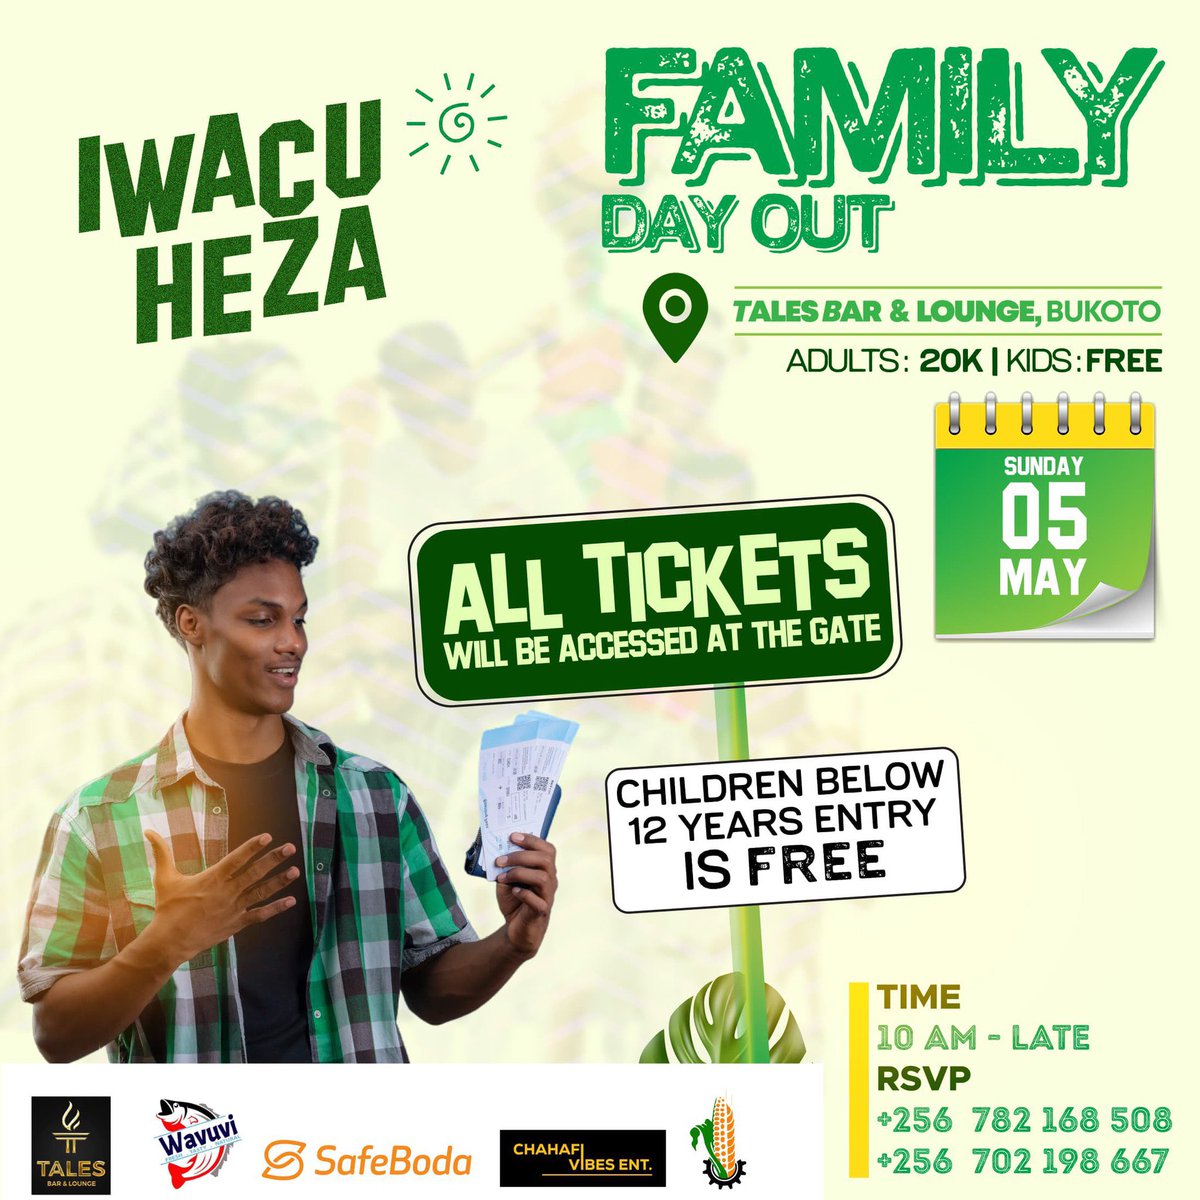 #Ads
📍 Tales Bar and lounge, Bukoto 
📅 Today 

Finally the #FamilyDayOut is here. 
Tickets for as low as 20k for adults and free entrance for kids below 12 years of age and a table is at 500k.

Tickets are only accessed at the gate.

#IwacuHeza 
#TweseTuribamwe